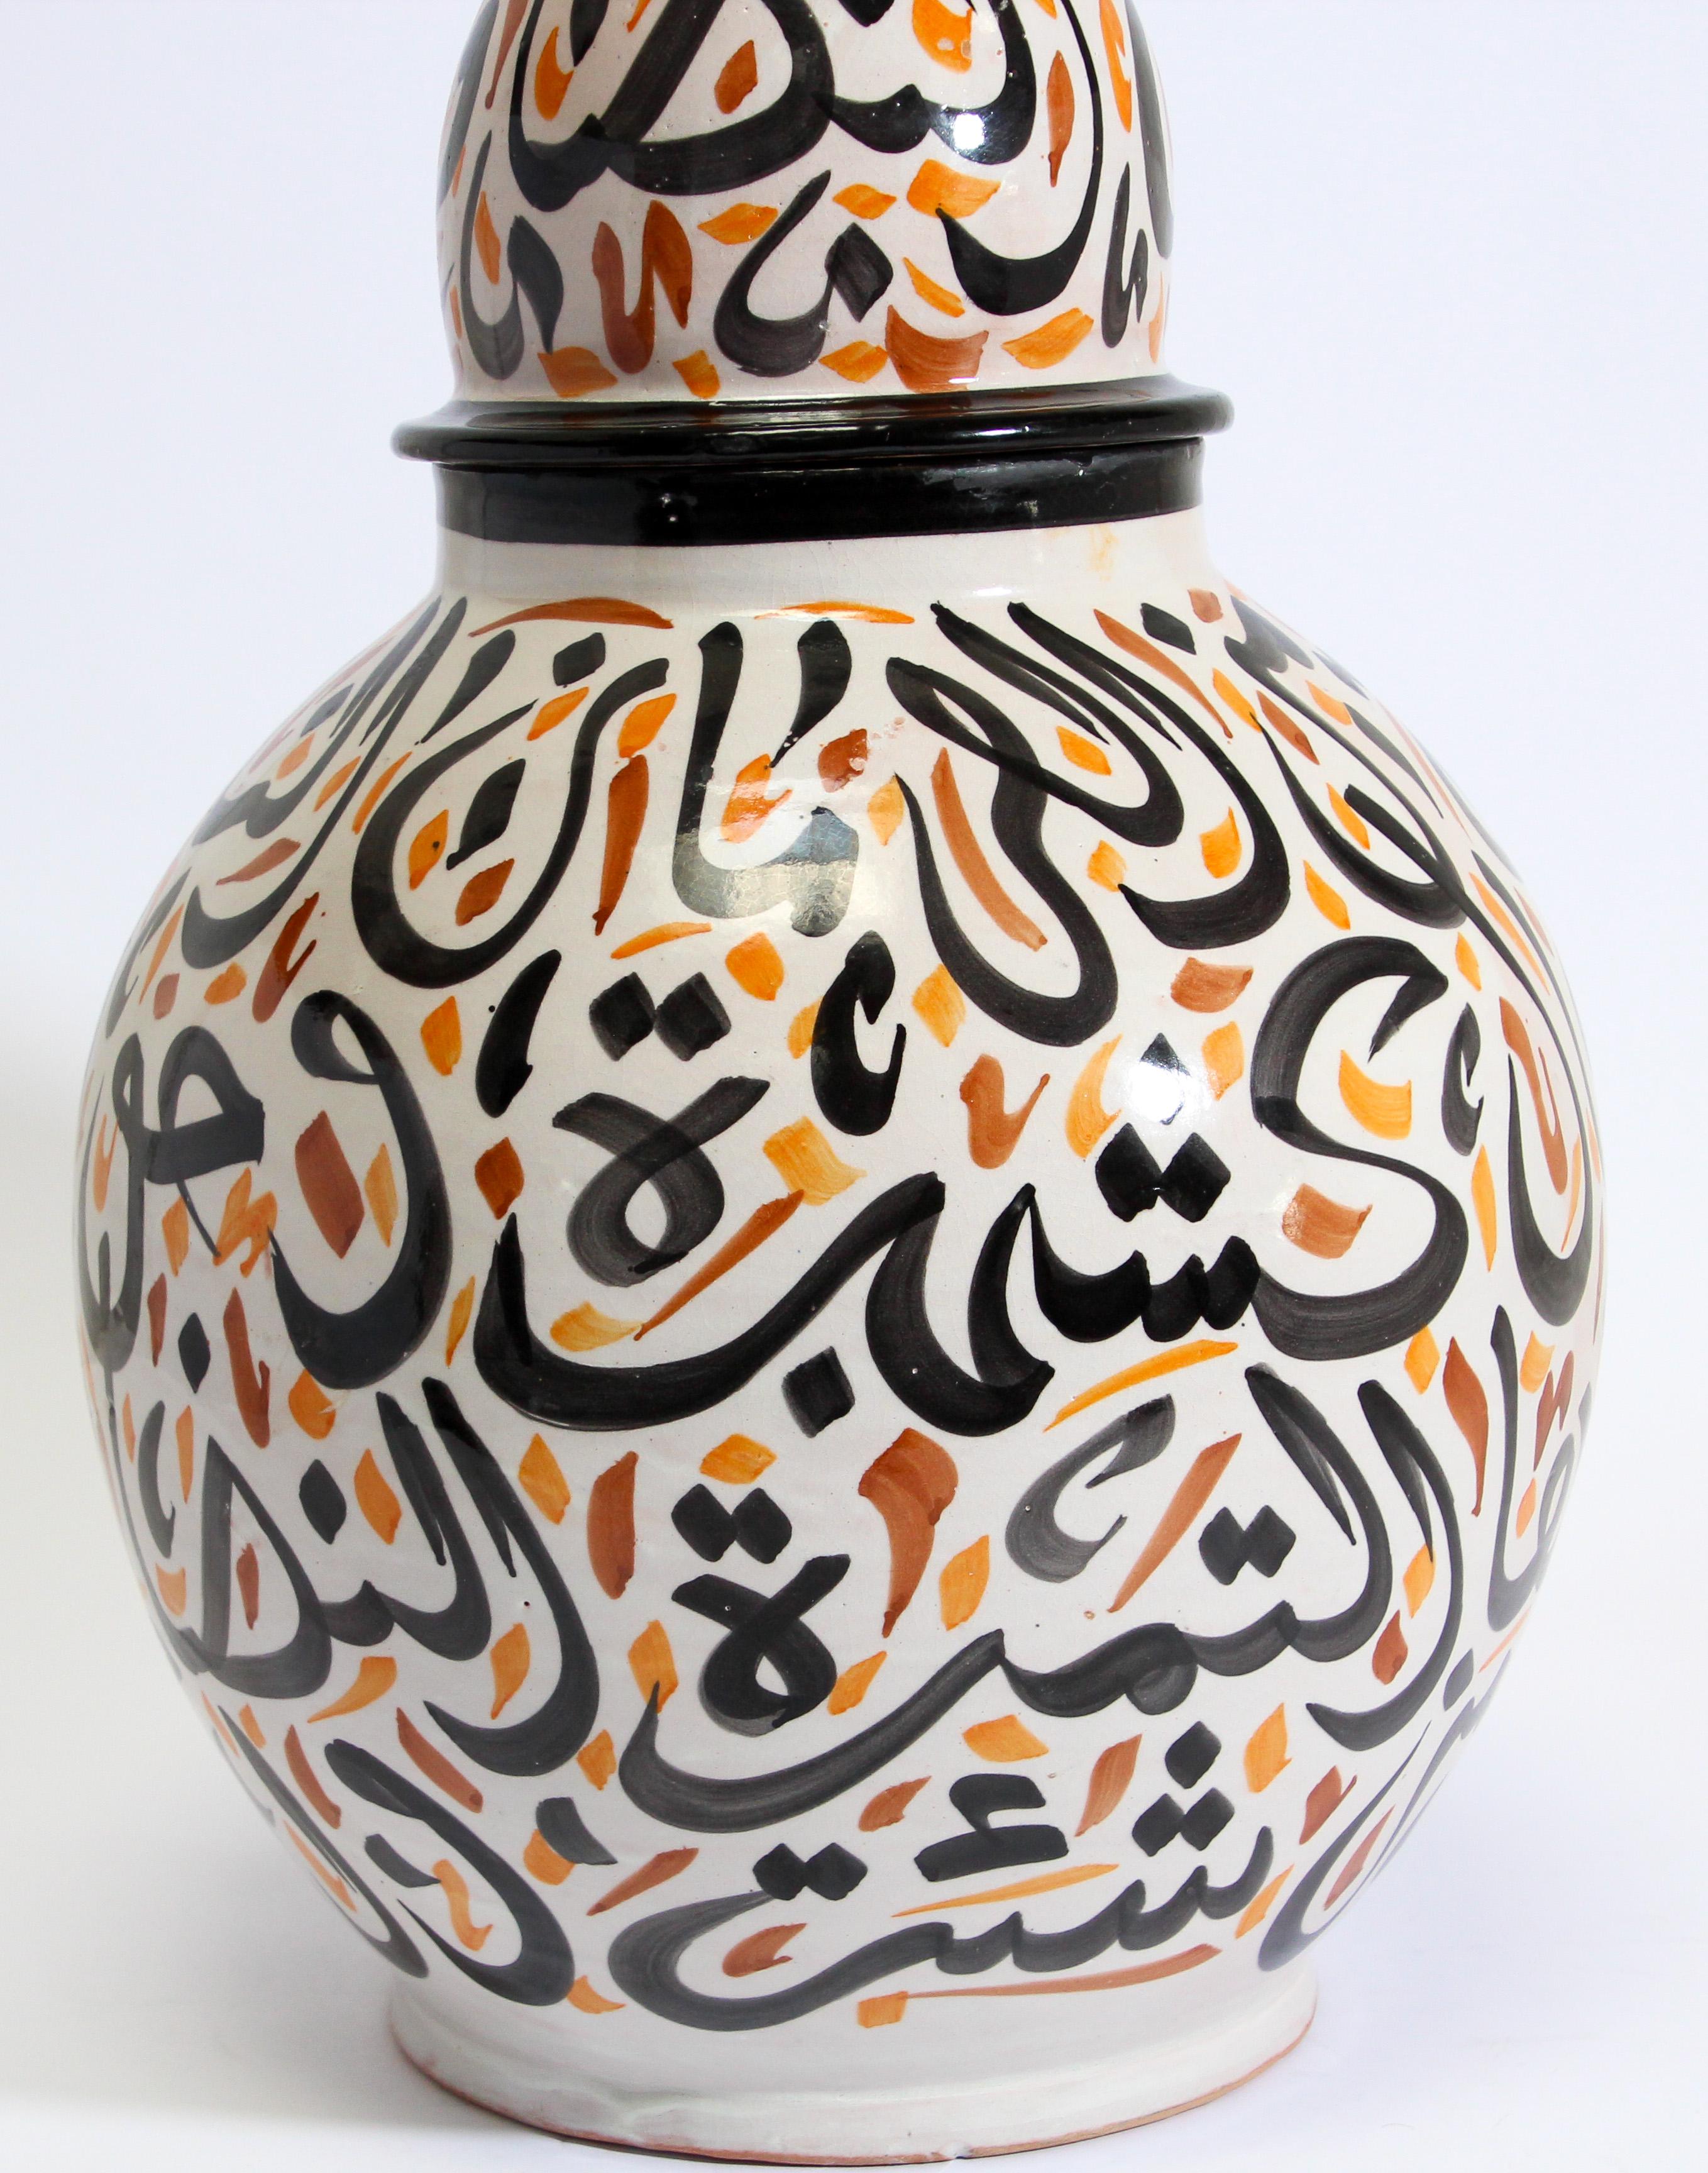 Large Moroccan glazed ceramic urn with lid from Fez.
Moorish style ceramic handcrafted and hand painted with Arabic calligraphy writing.
This kind of Art Writing looks calligraphic is called Lettrism, it is a form of art that uses letters that are